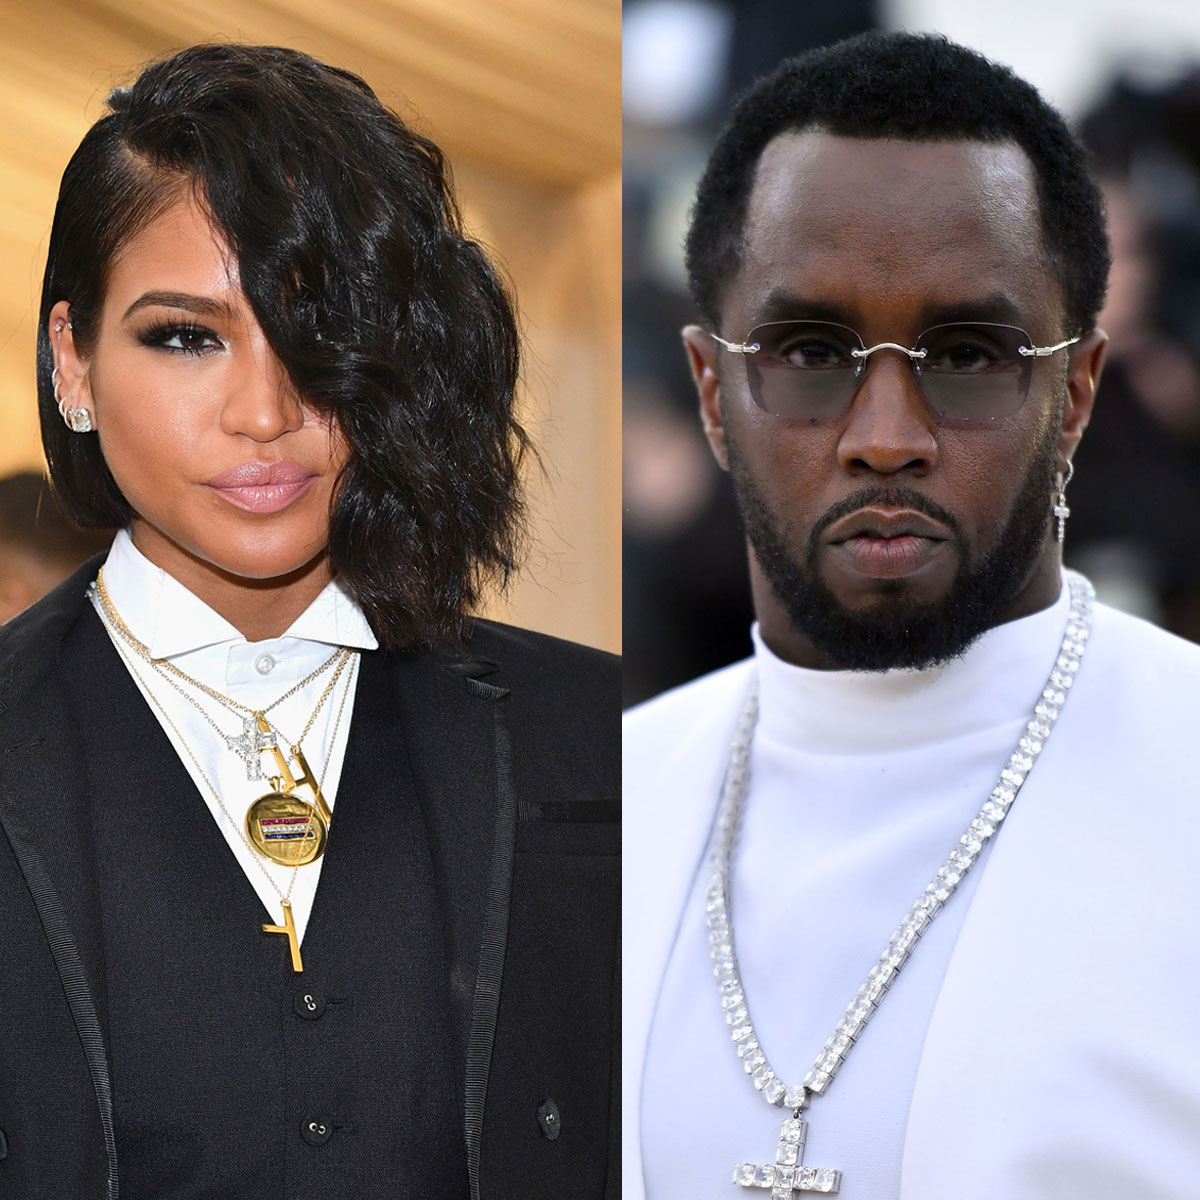 Diddy Breaks Silence About Video Appearing to Show Him Assault Cassie